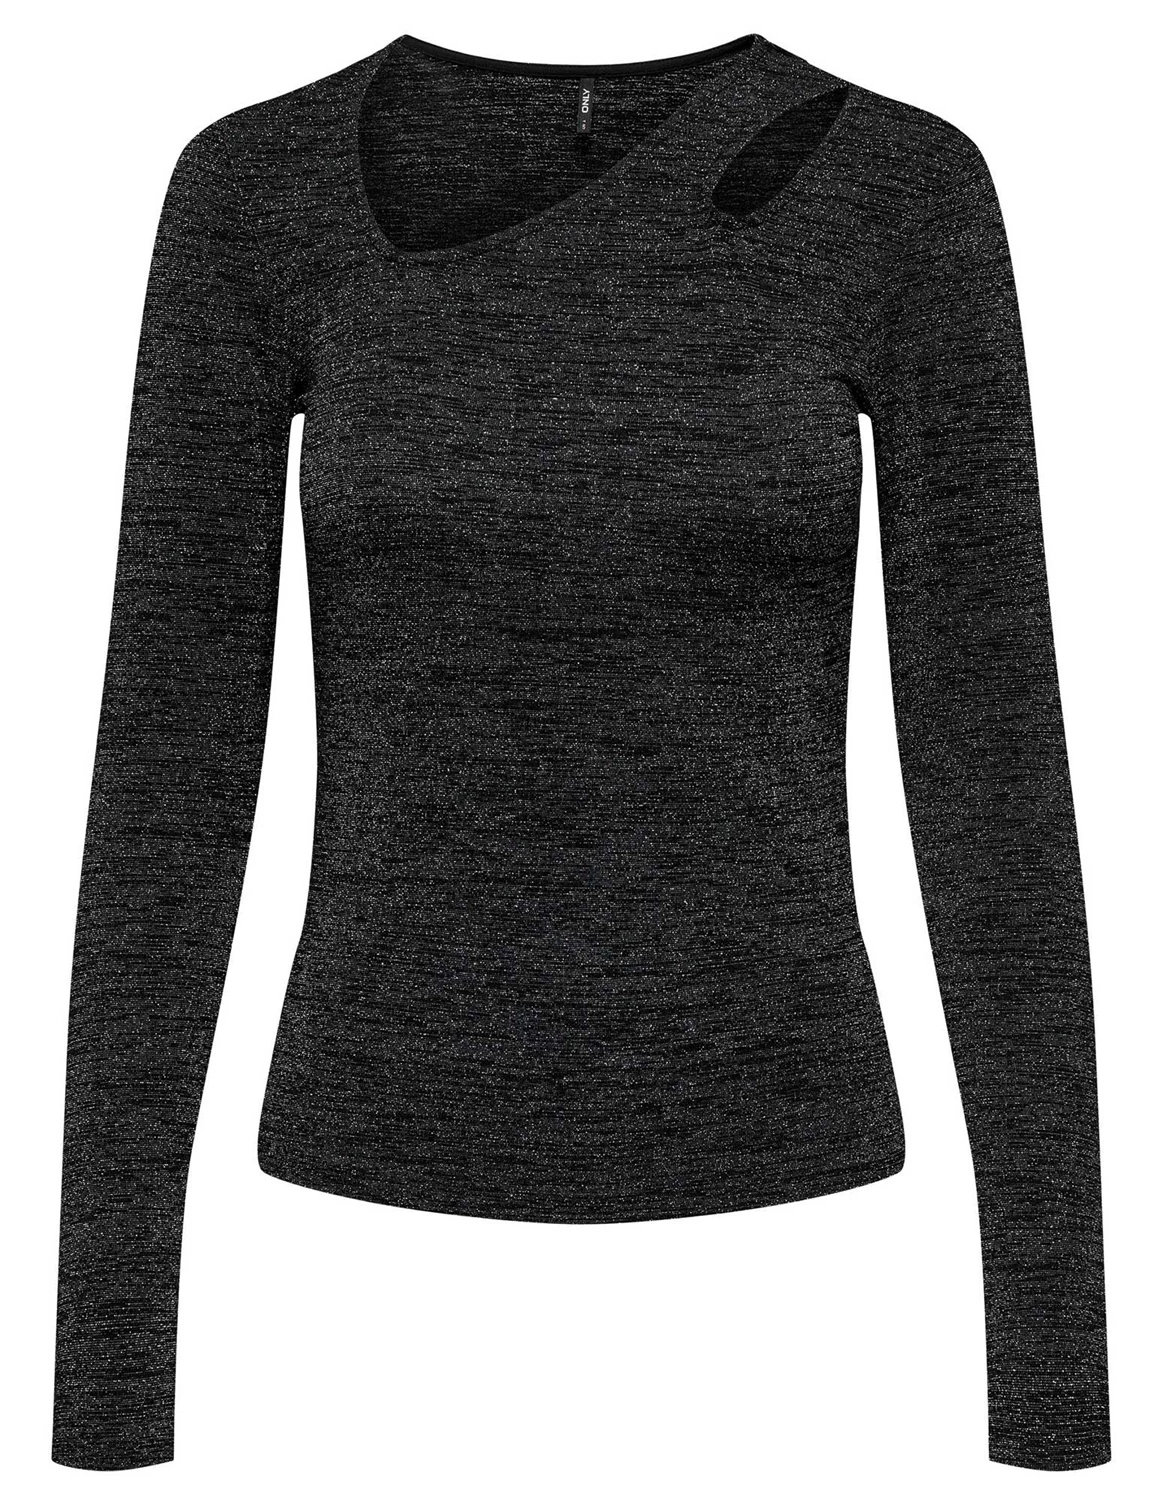 Stone Only TOP SHINE CUT-OUT 15311748 The JRS zilver bij L/S ONLROMA kopen